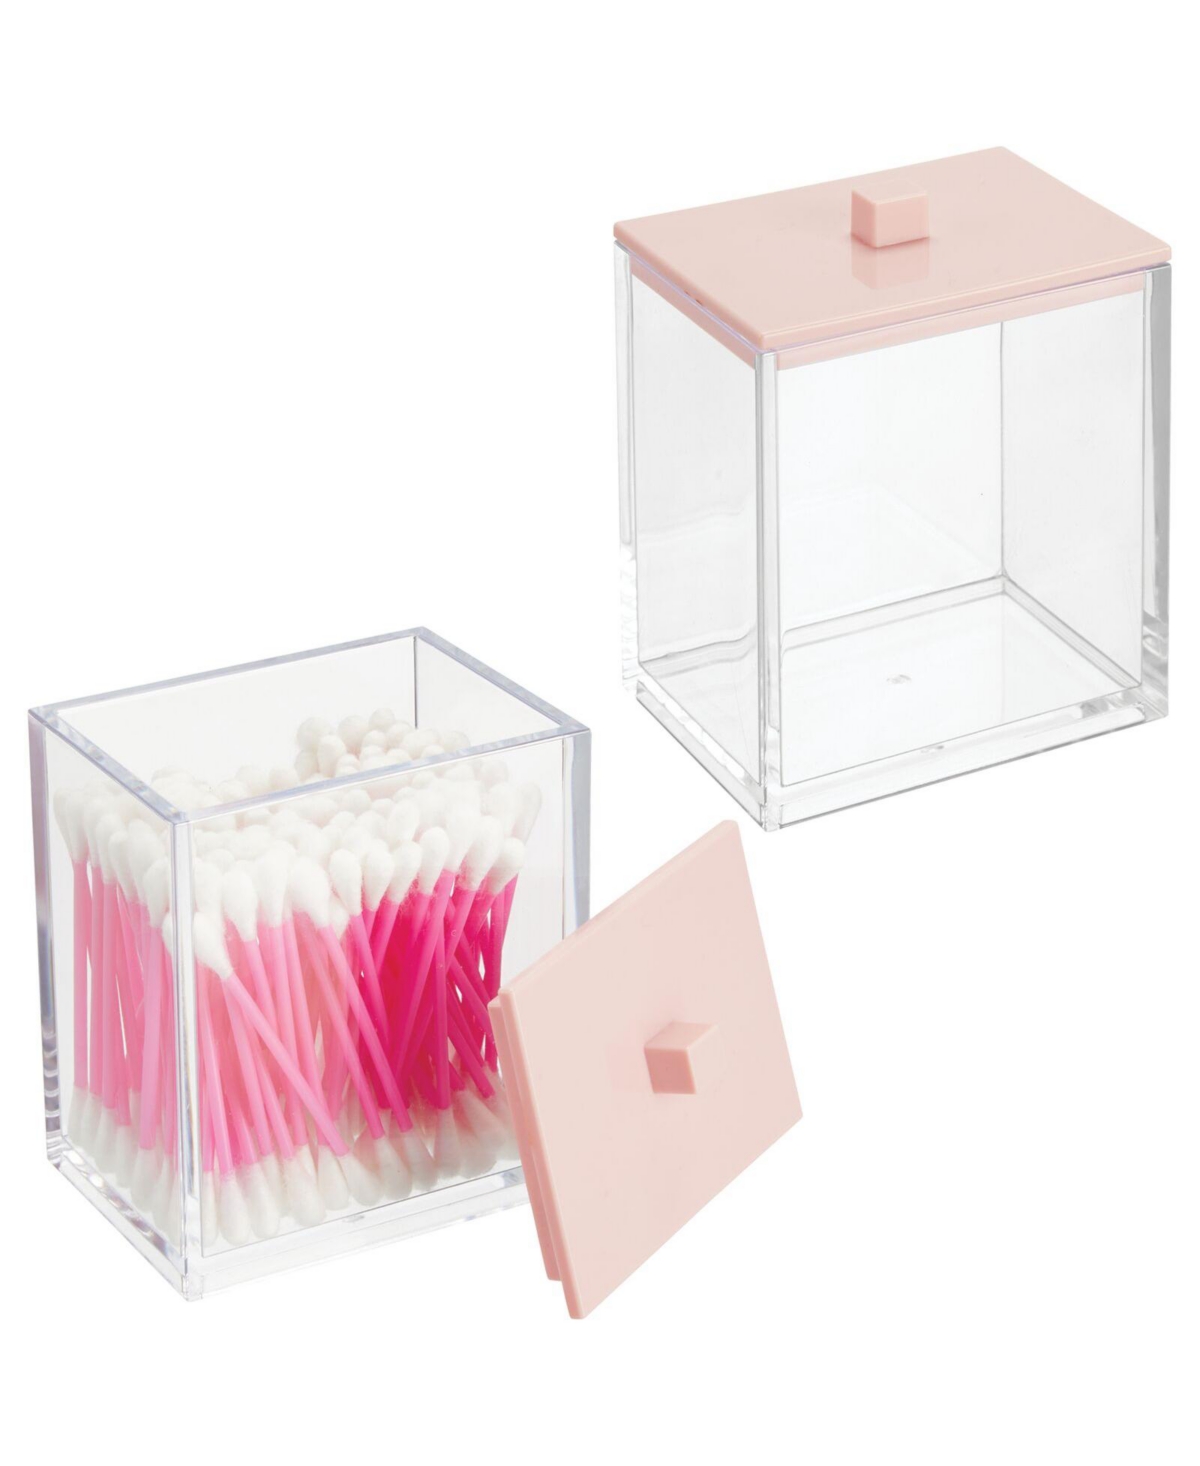 Plastic Rectangle Apothecary Jar Storage Canister - 2 Pack - Clear/light pink